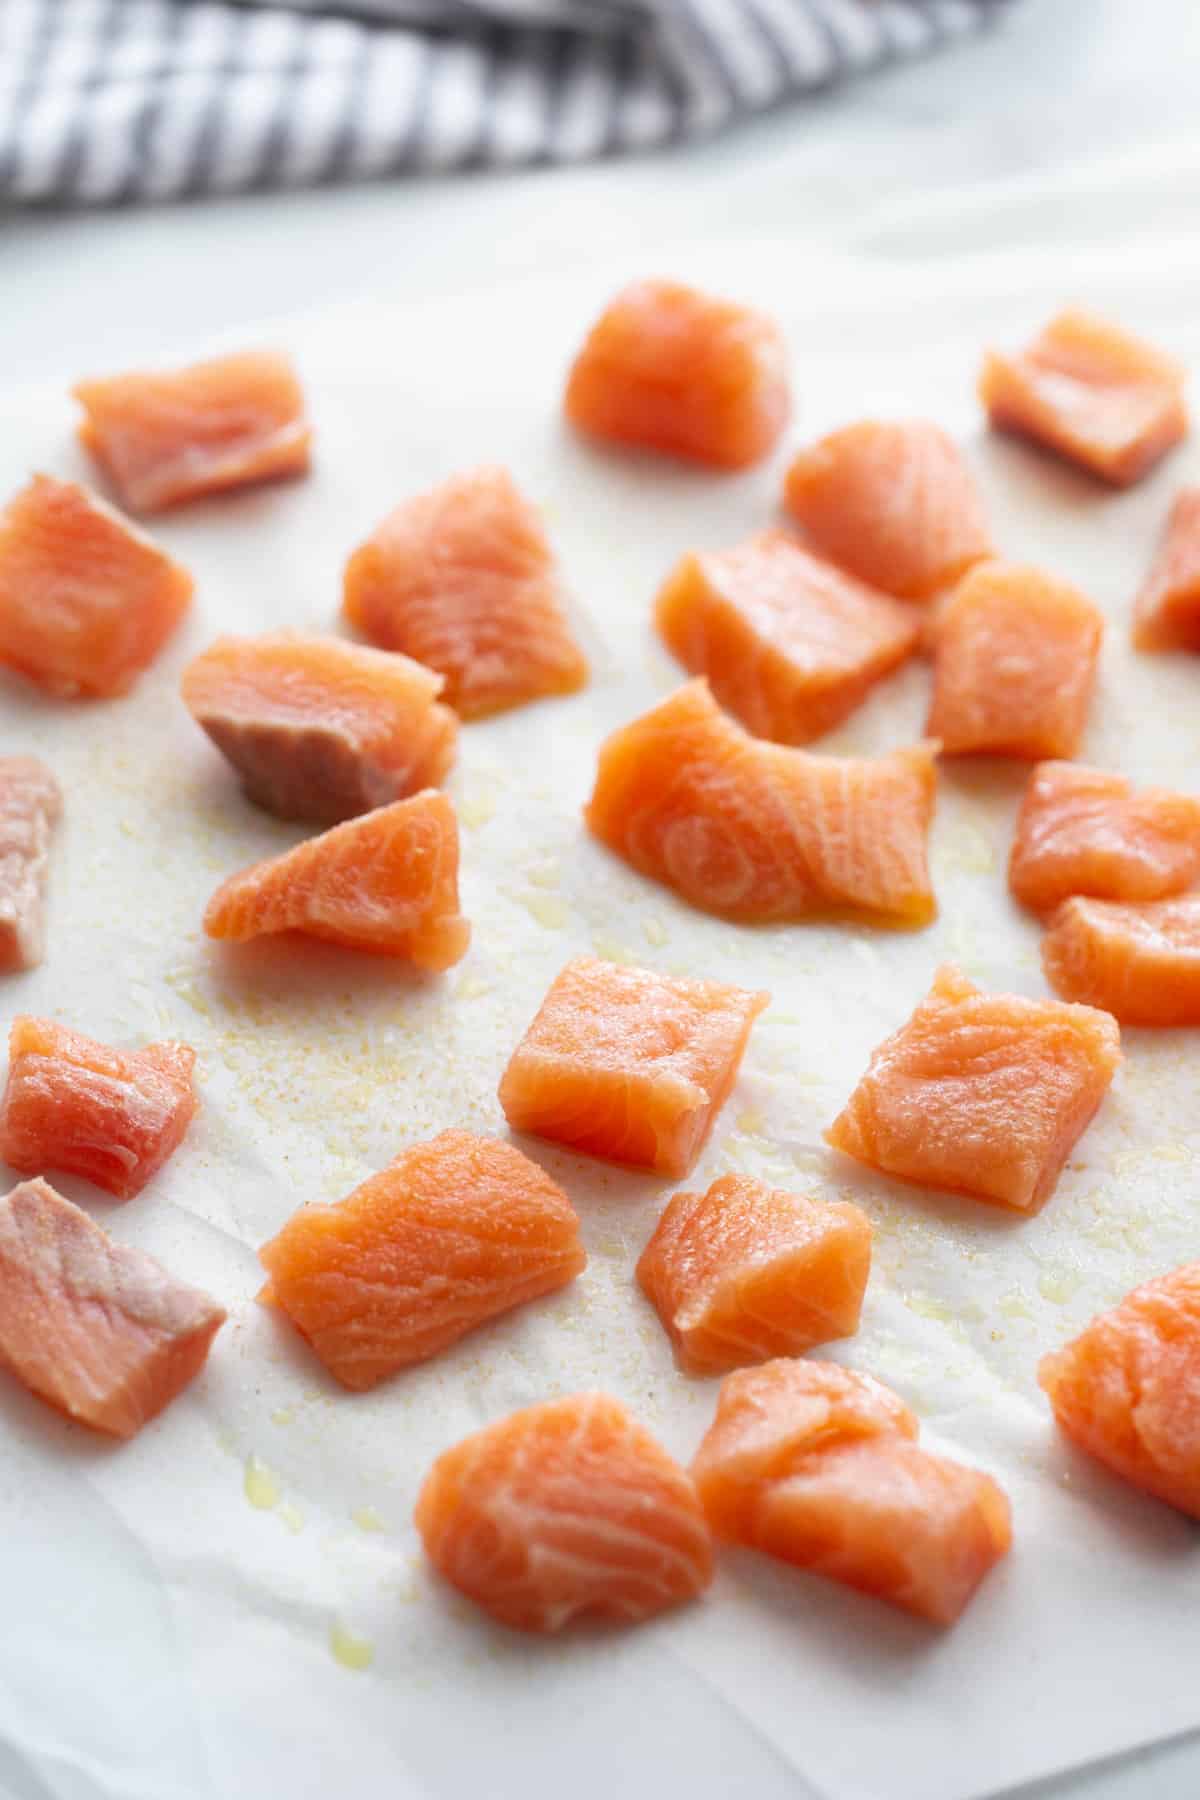 Cubes of seasoned salmon chunks on parchment paper.